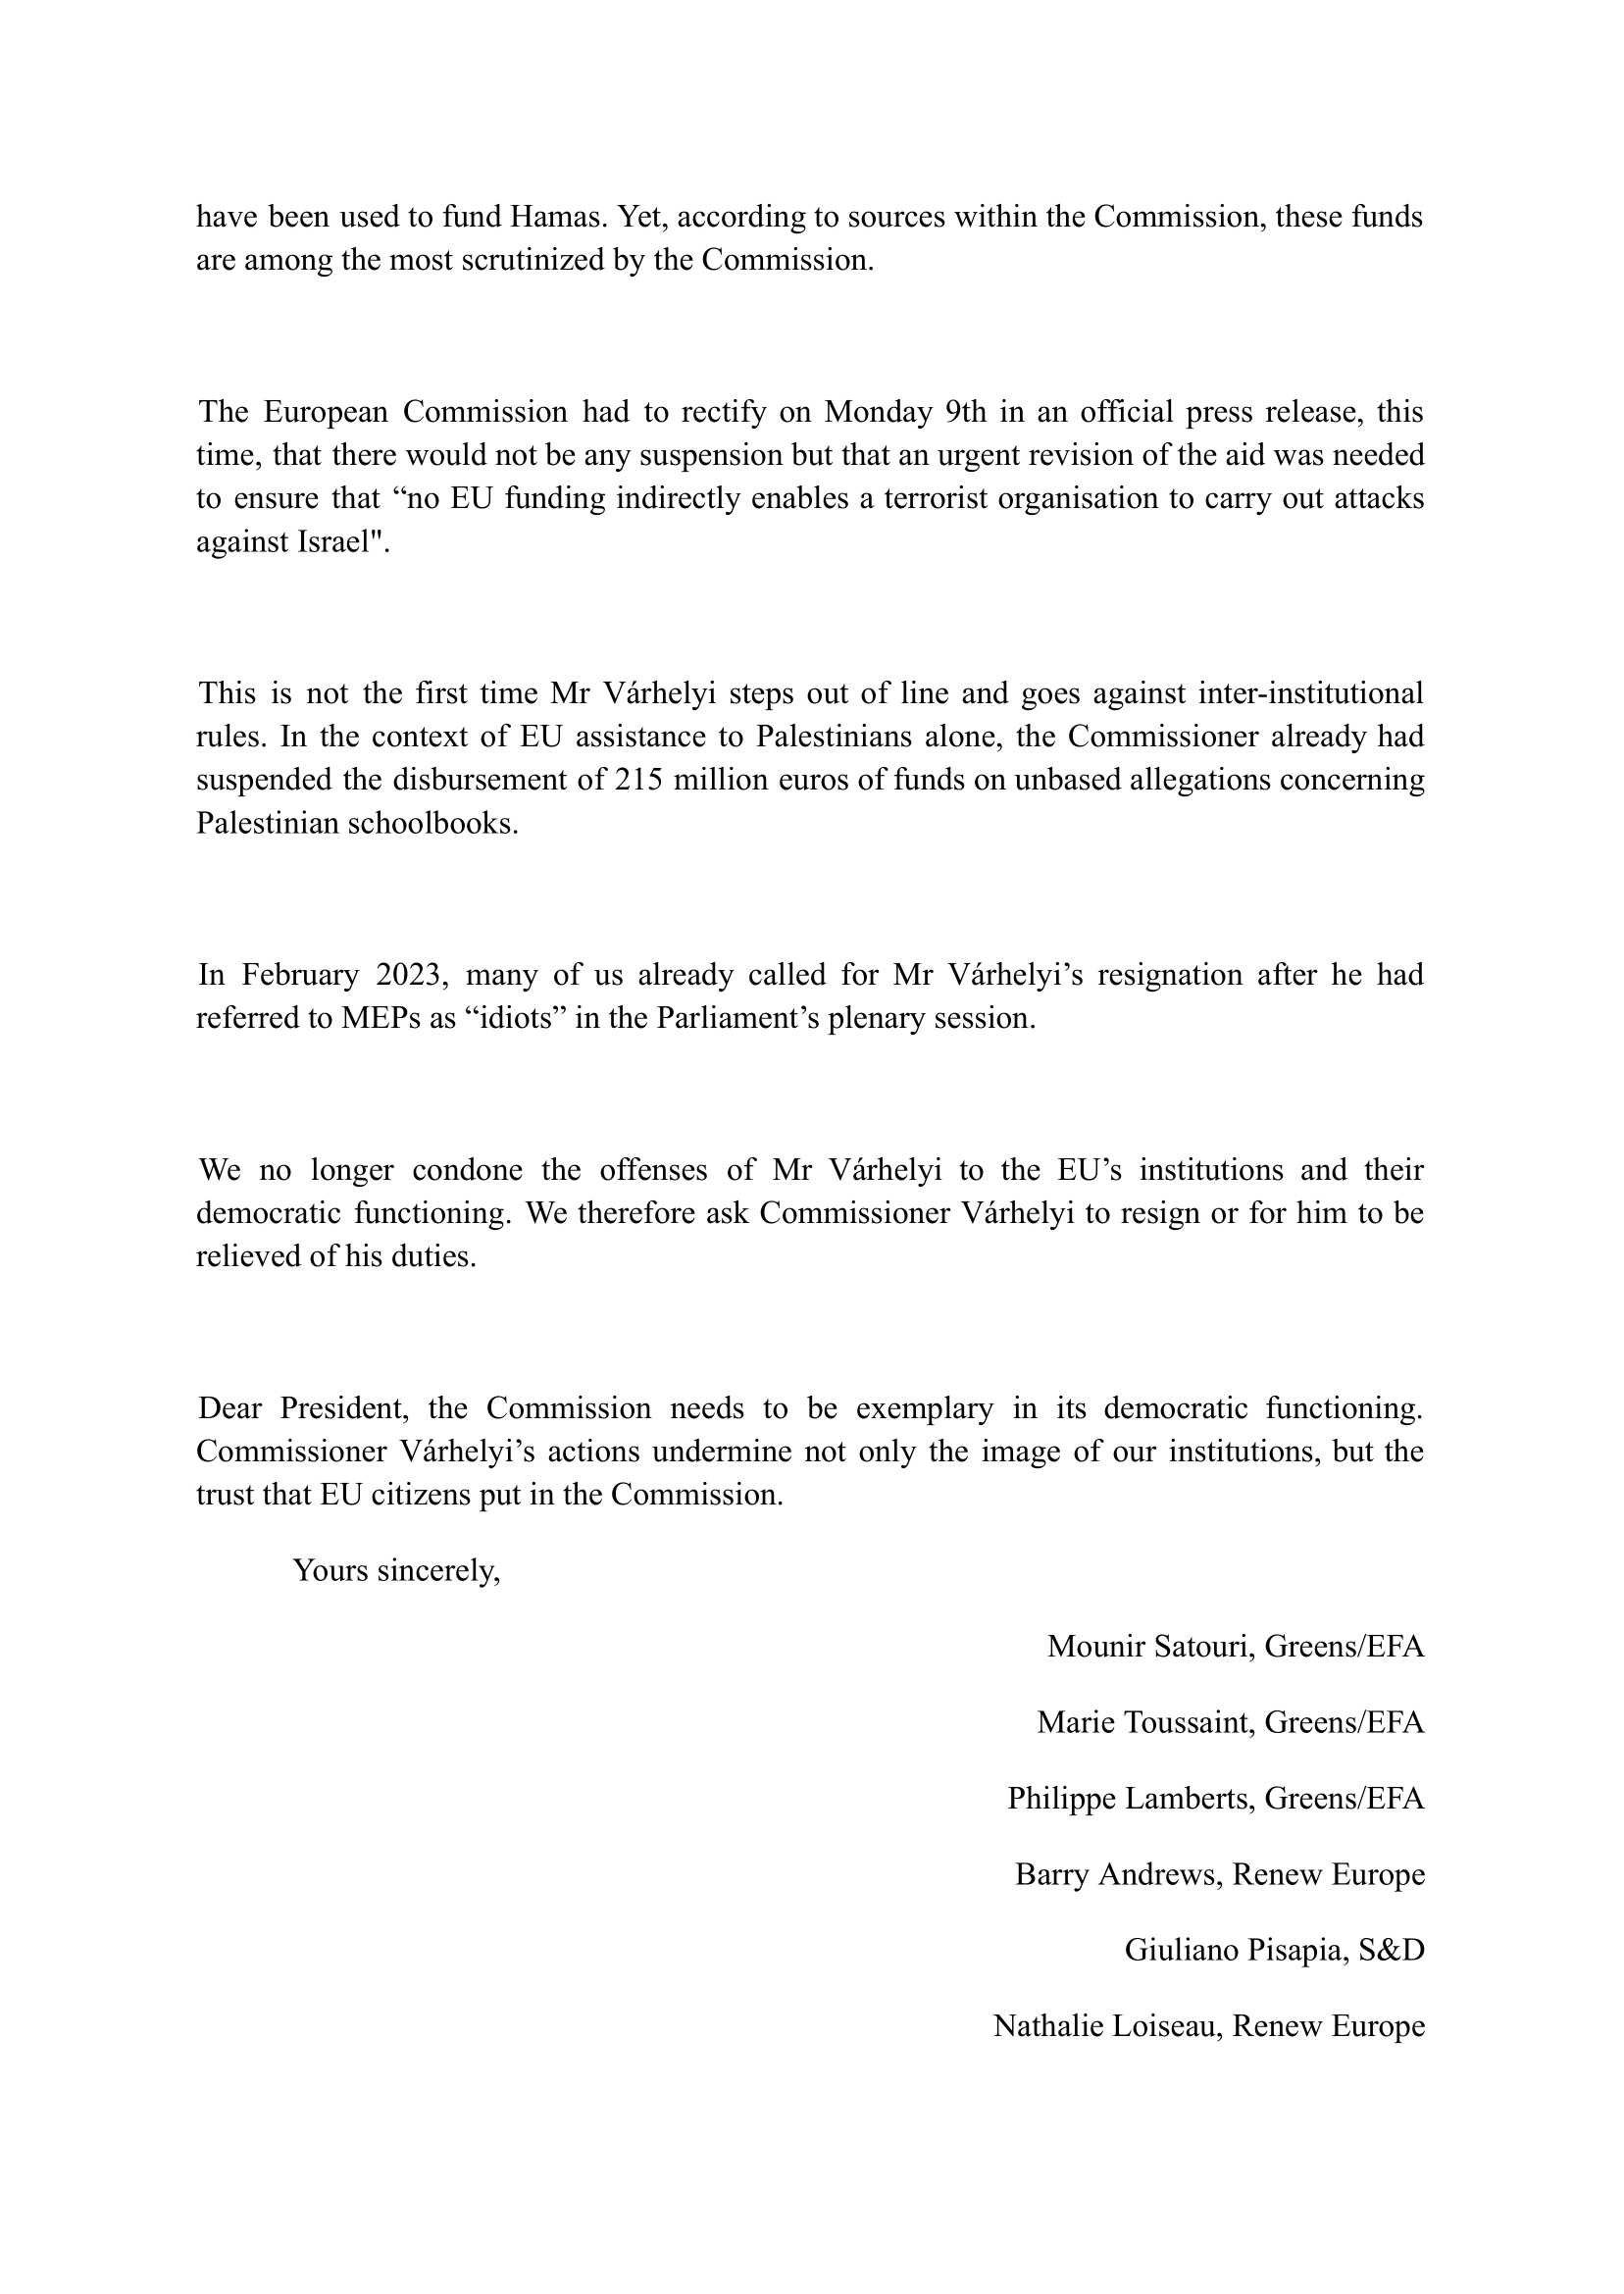 2023-10-17 - Letter to VDL on resignation 2.png